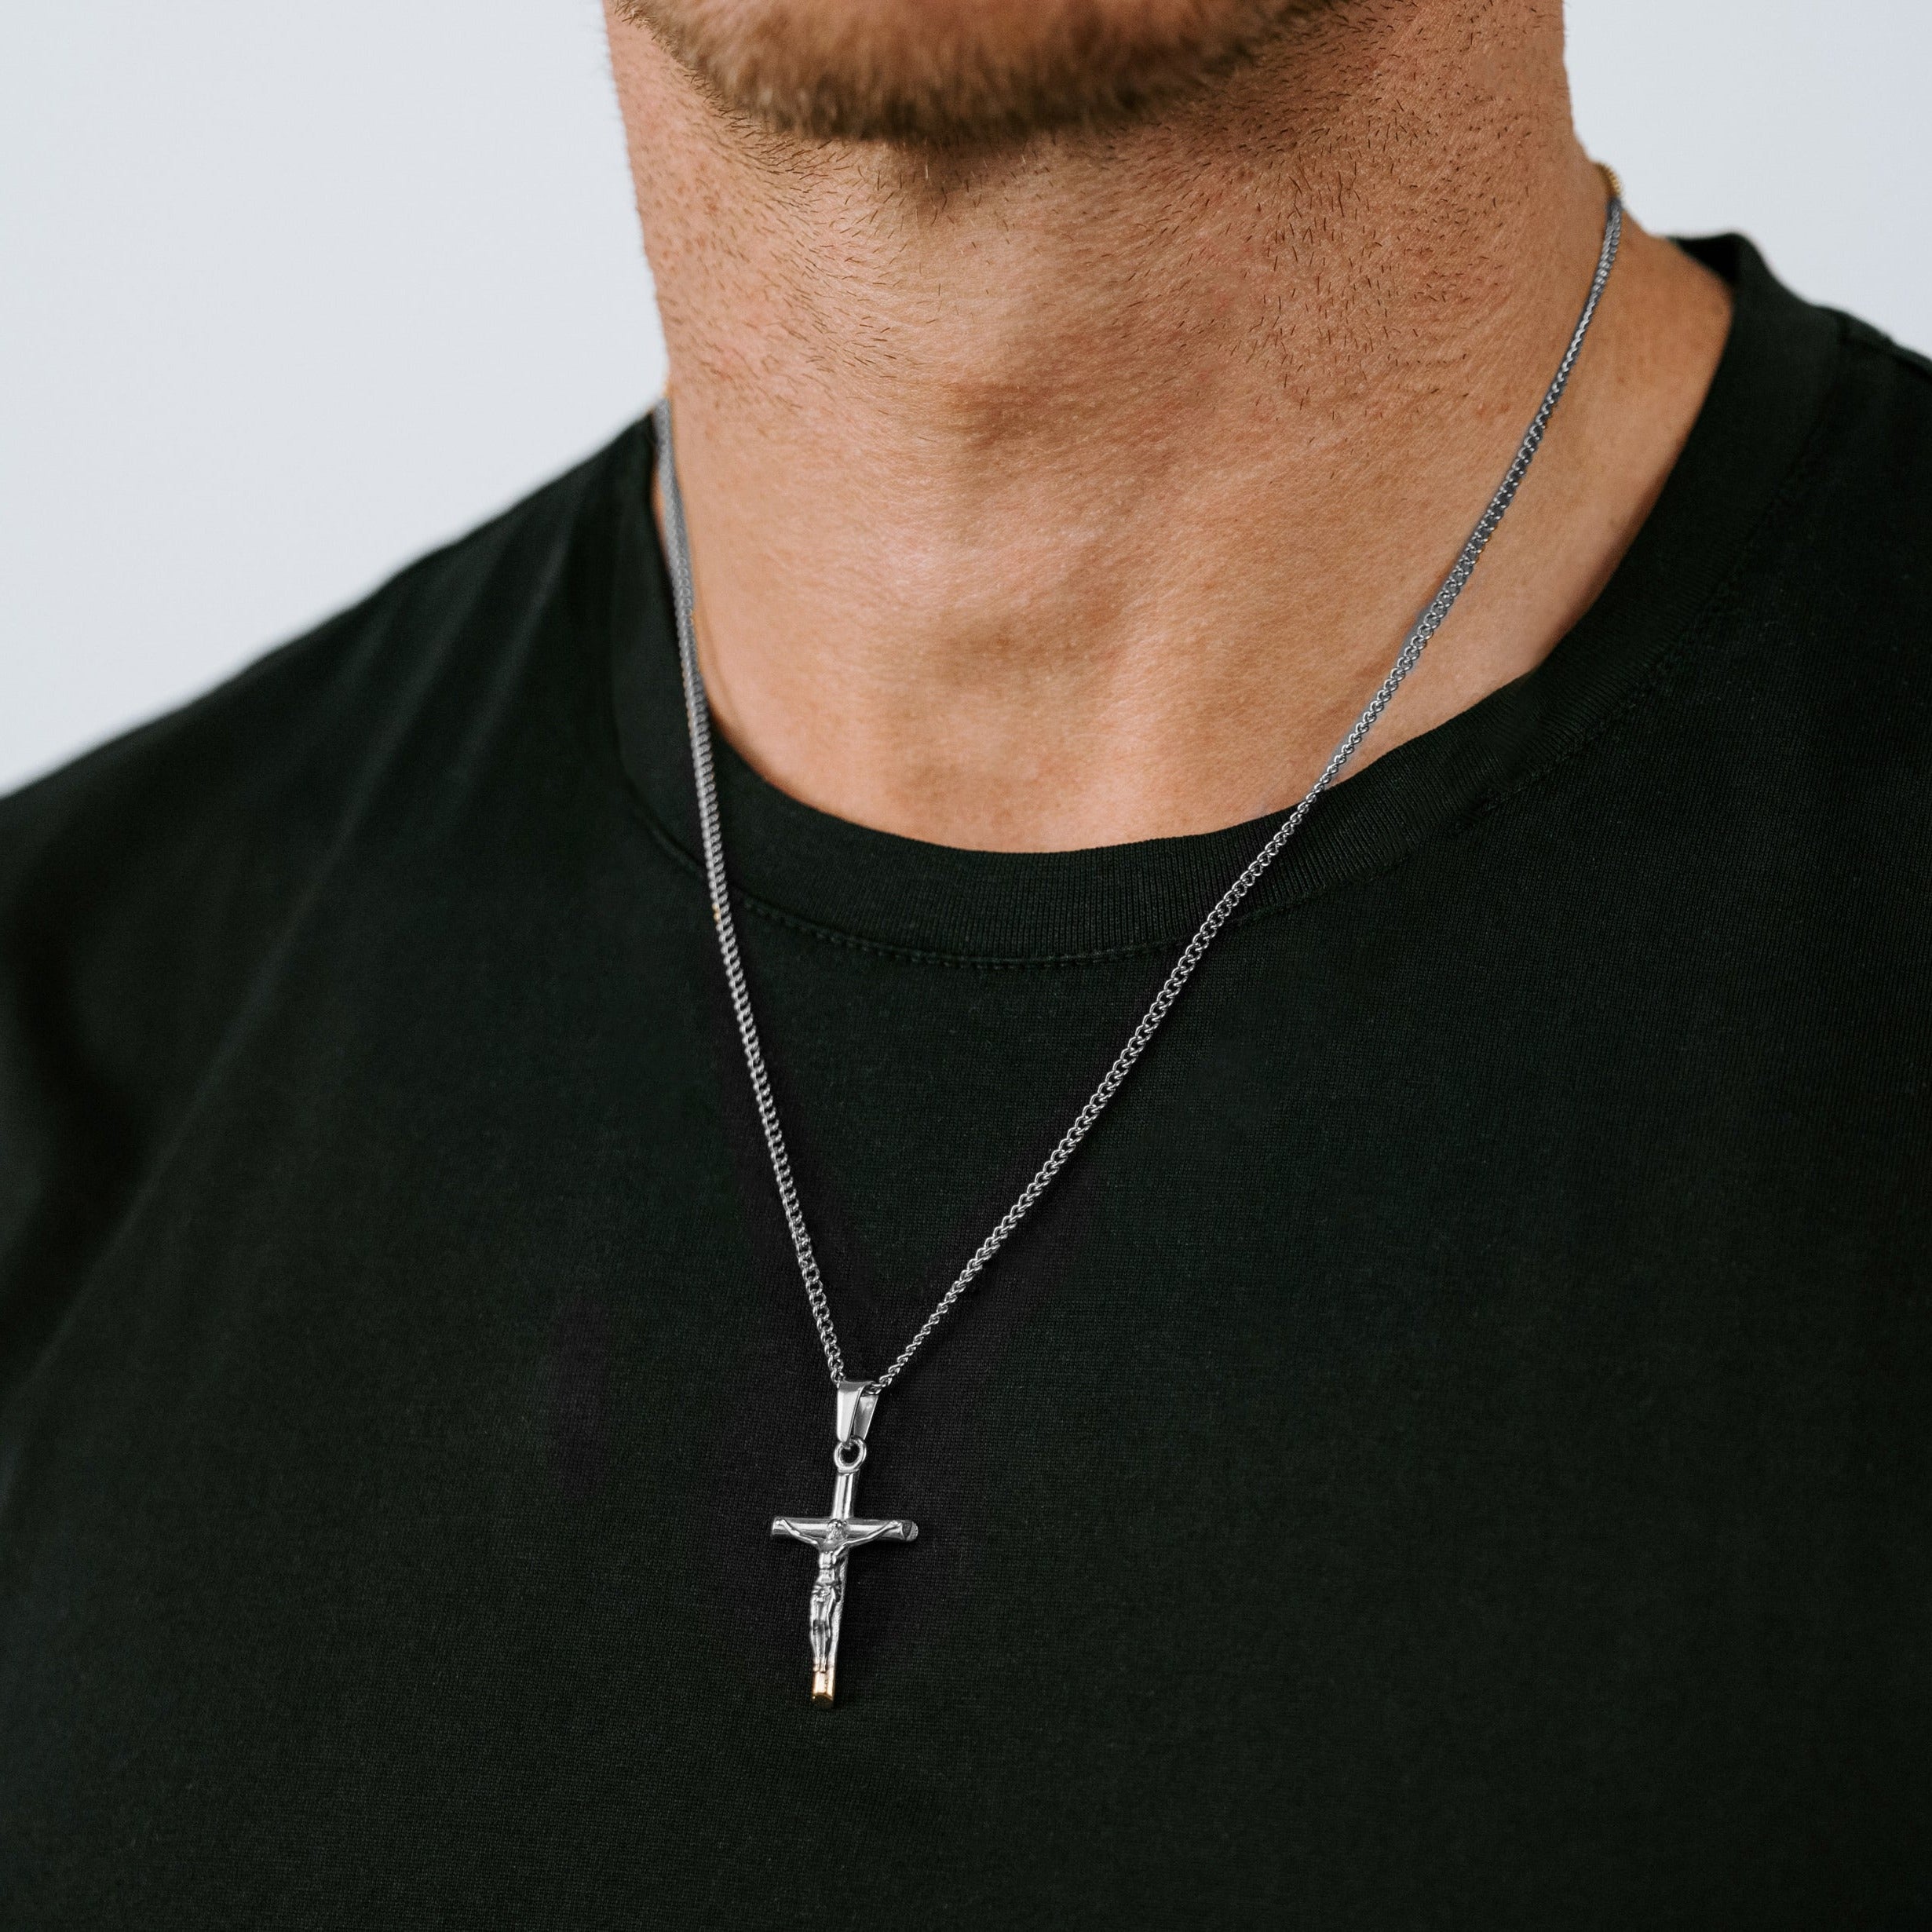 Stainless Steel Crucifix Pendant and Cuban link chain